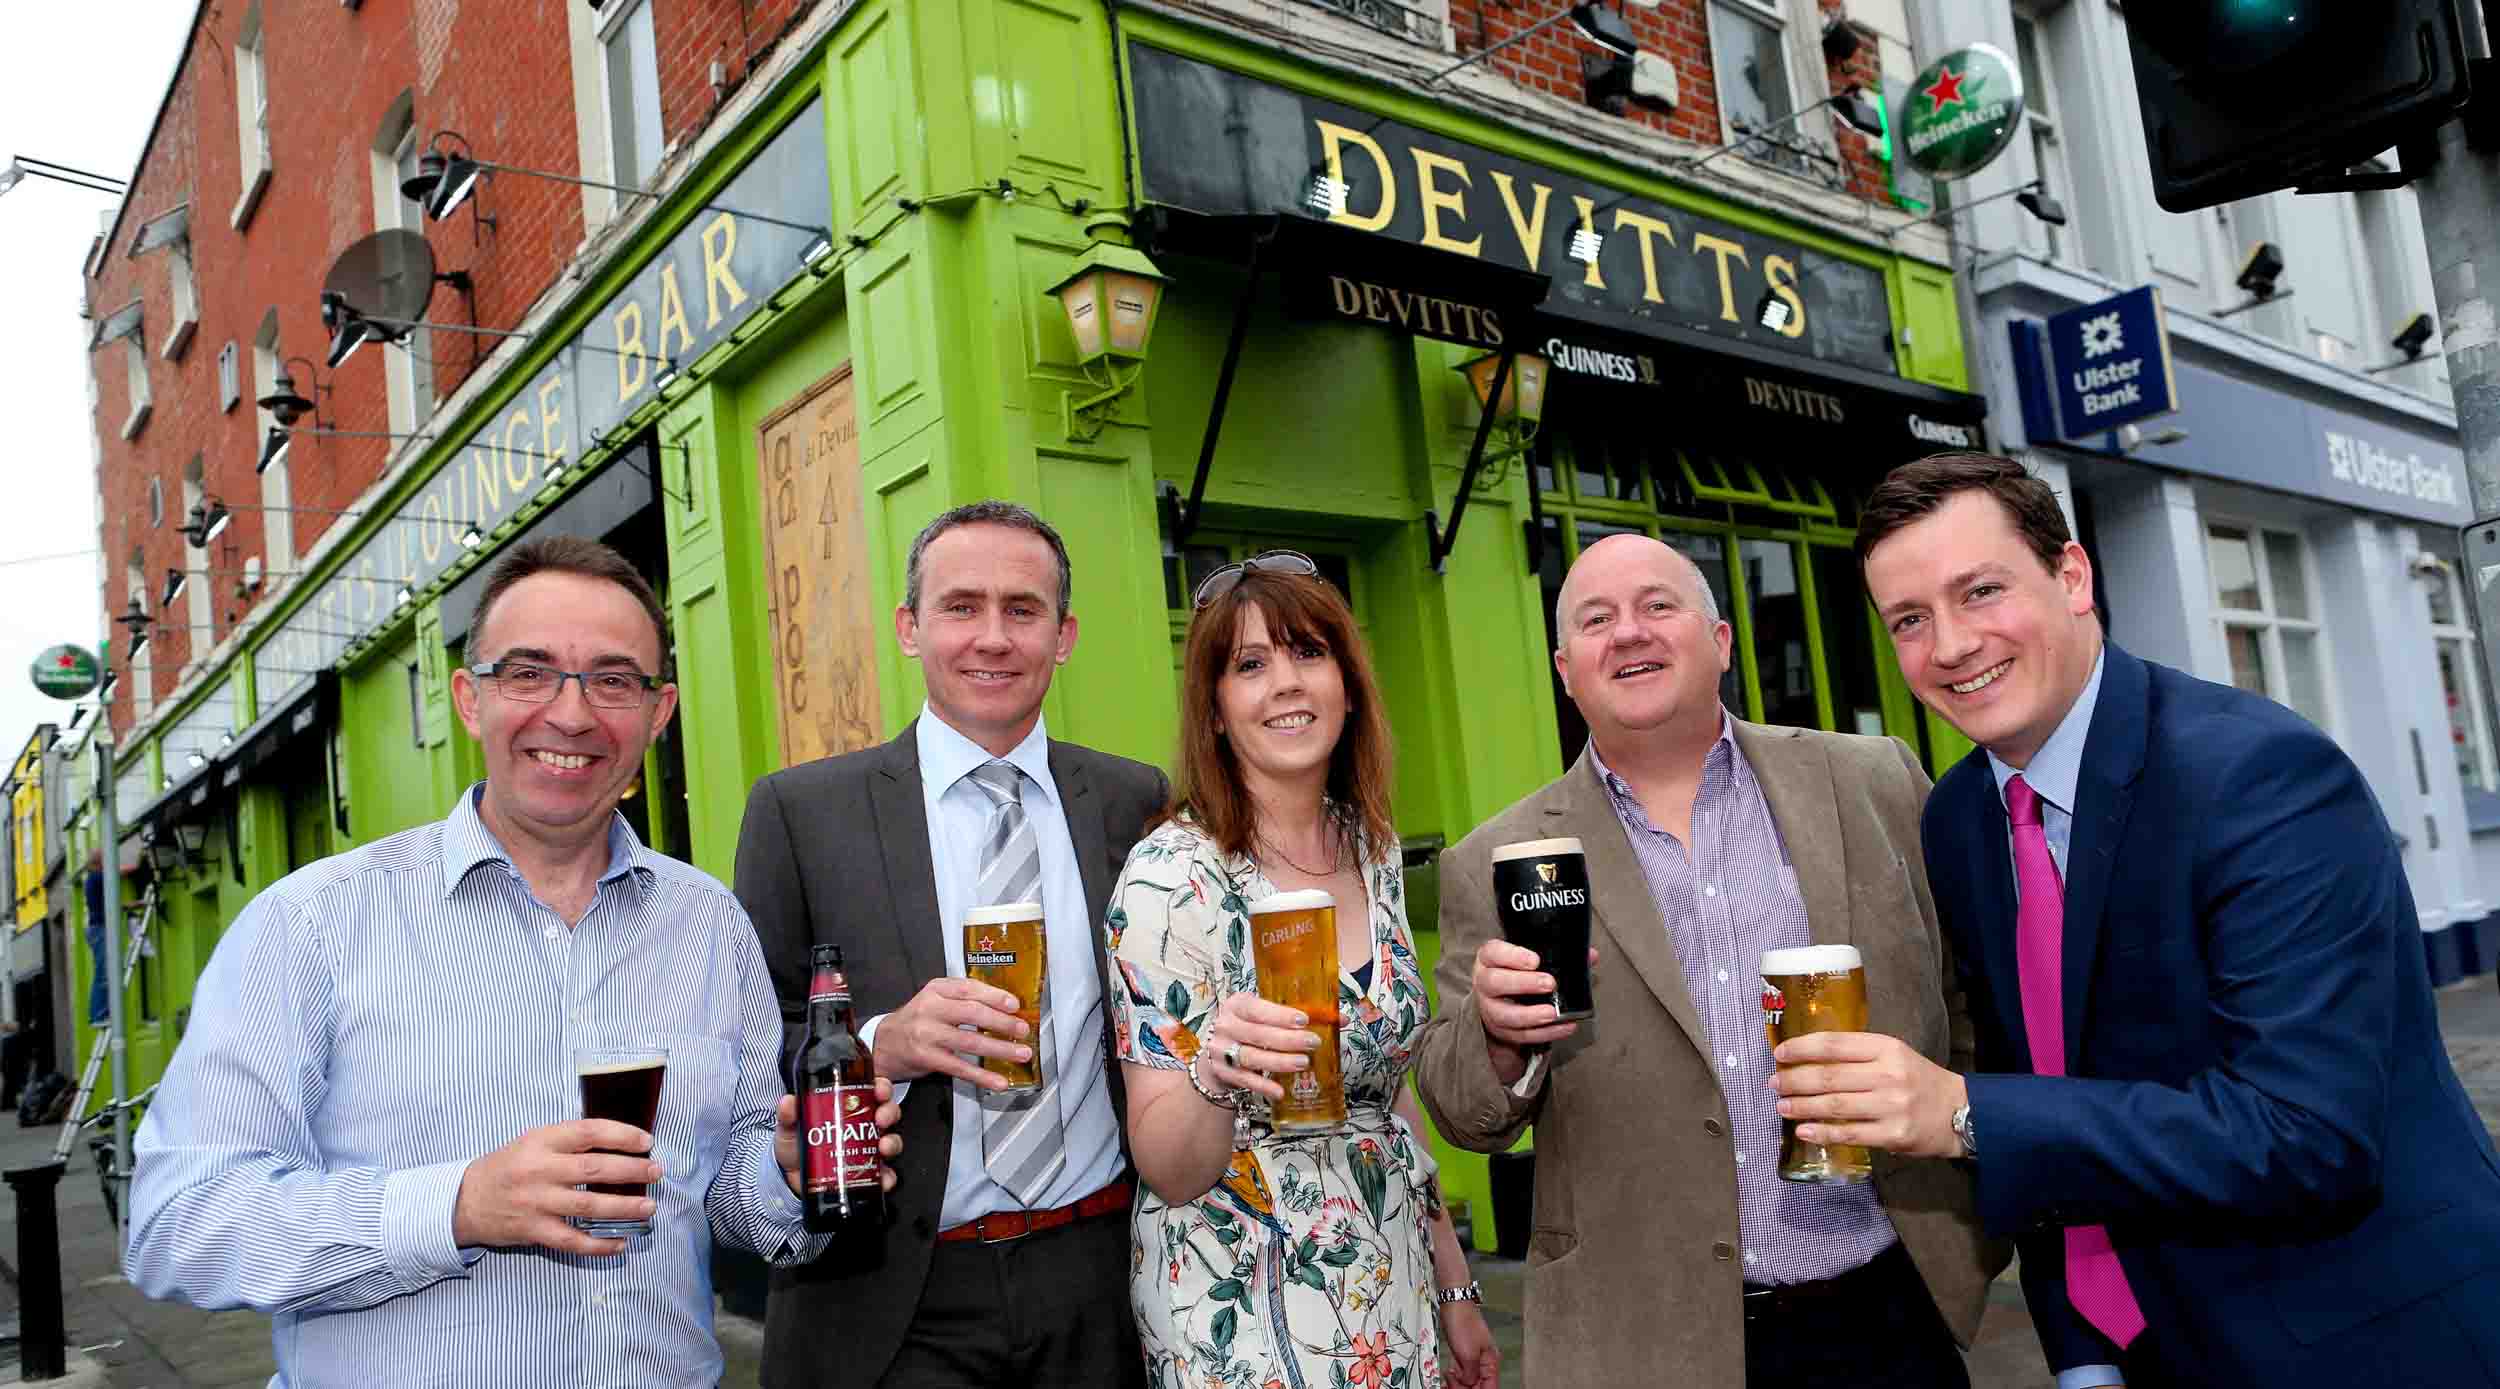 Perfect launch – Launching the Irish Brewers Association's new technical dispense programme are (from left): IBA Chairman and Carlow Brewing Company Founder Seamus O'Hara, IBA’s Technical Committee Chairman and QA & Asset Manager at Heineken Ireland Ian Reidy, LVA Chair and owner of Devitt’s bar Deirdre Devitt, Quality Operations Manager at Diageo Dave Duggan and IBA Head Jonathan McDade.